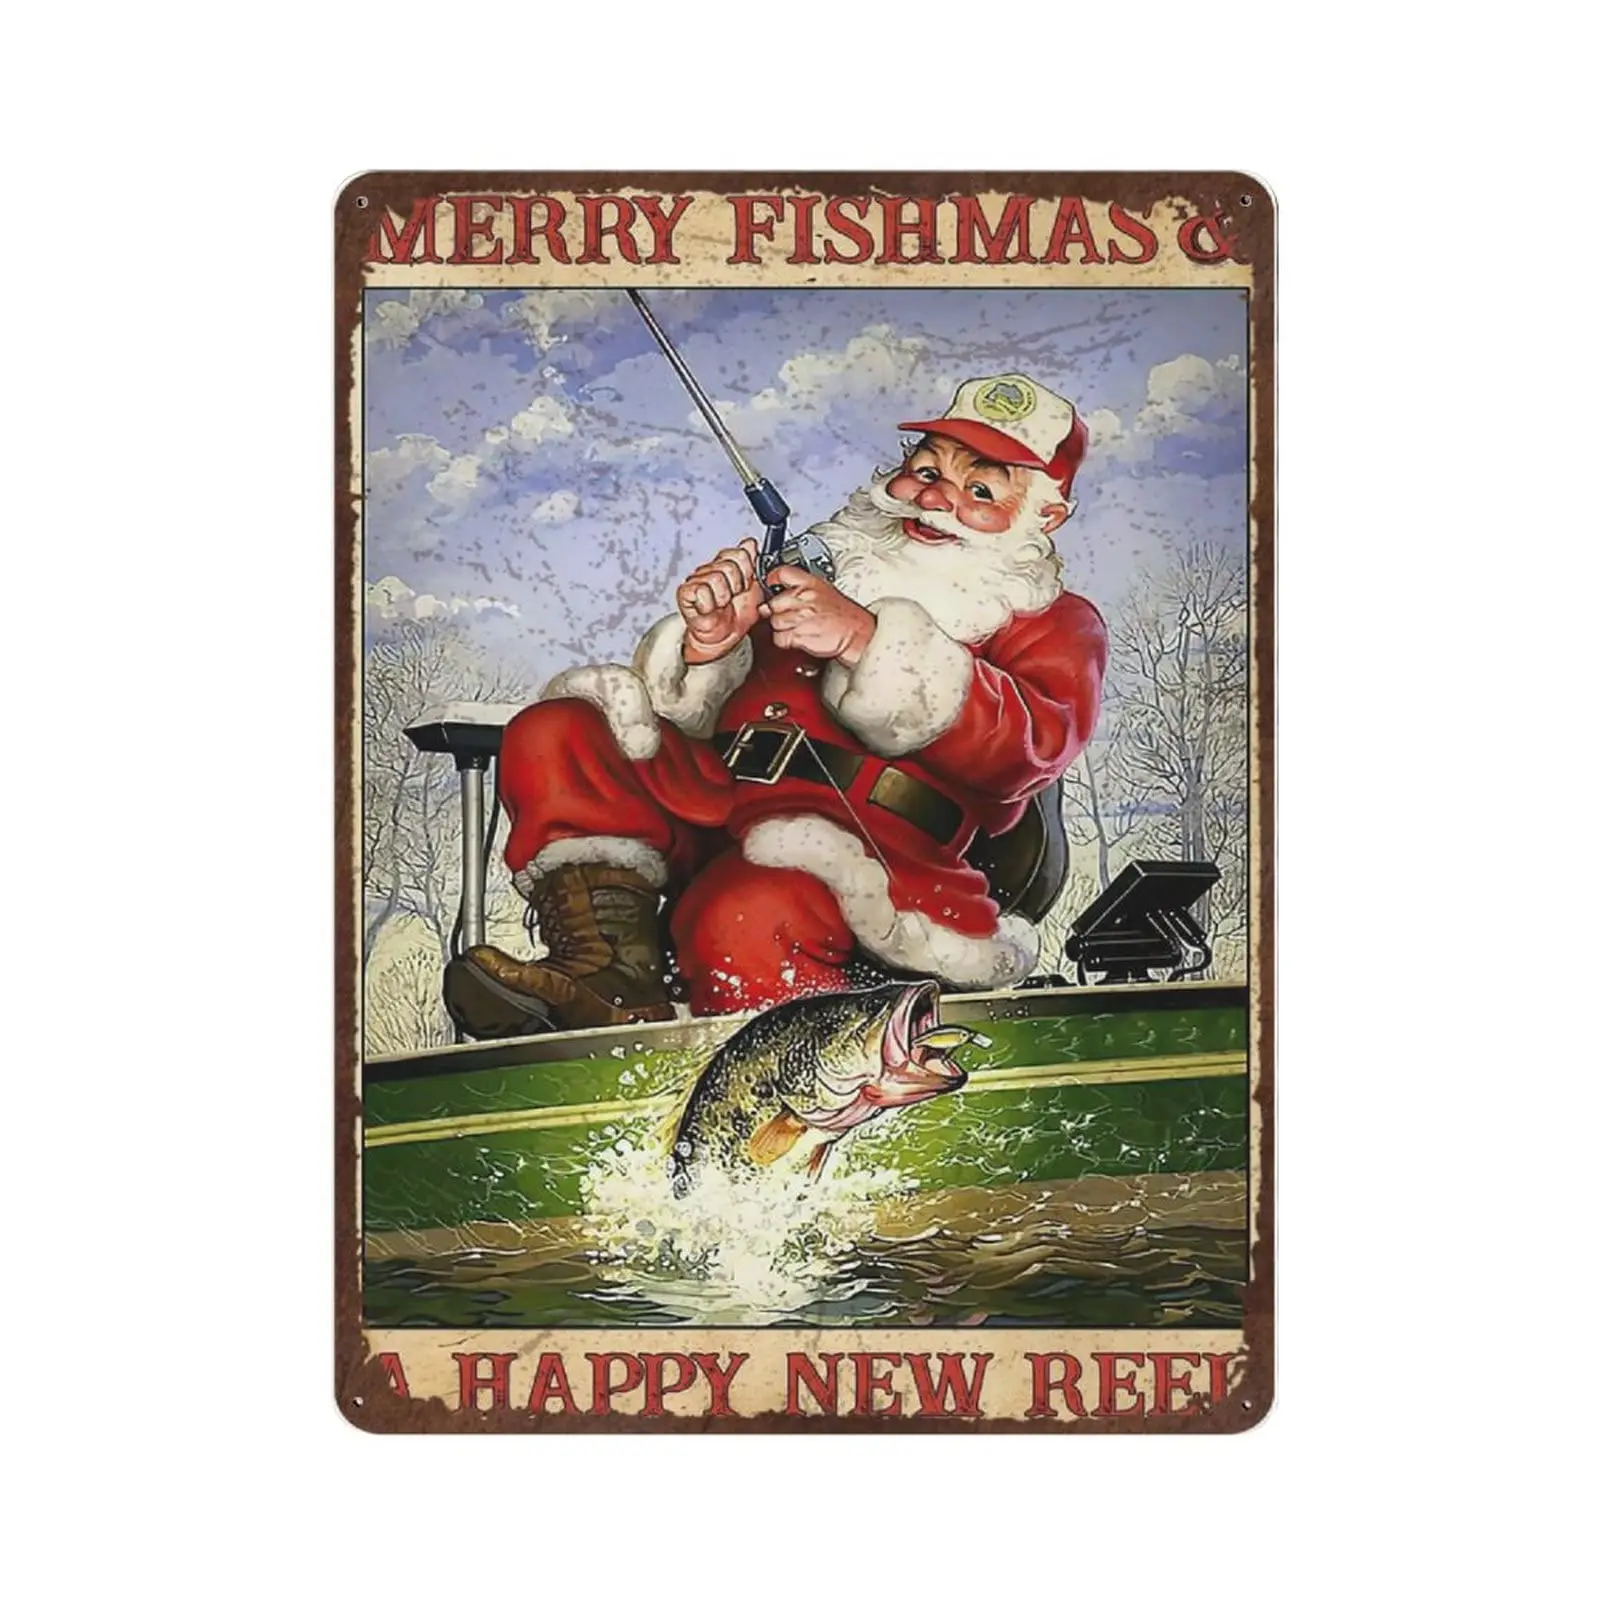 

Antique Durable Thick Metal Sign，Christmas Fisherman Tin Sign, Merry Fishmas And A Happy New Reel Tin Sign，Vintage Wall Decor，No